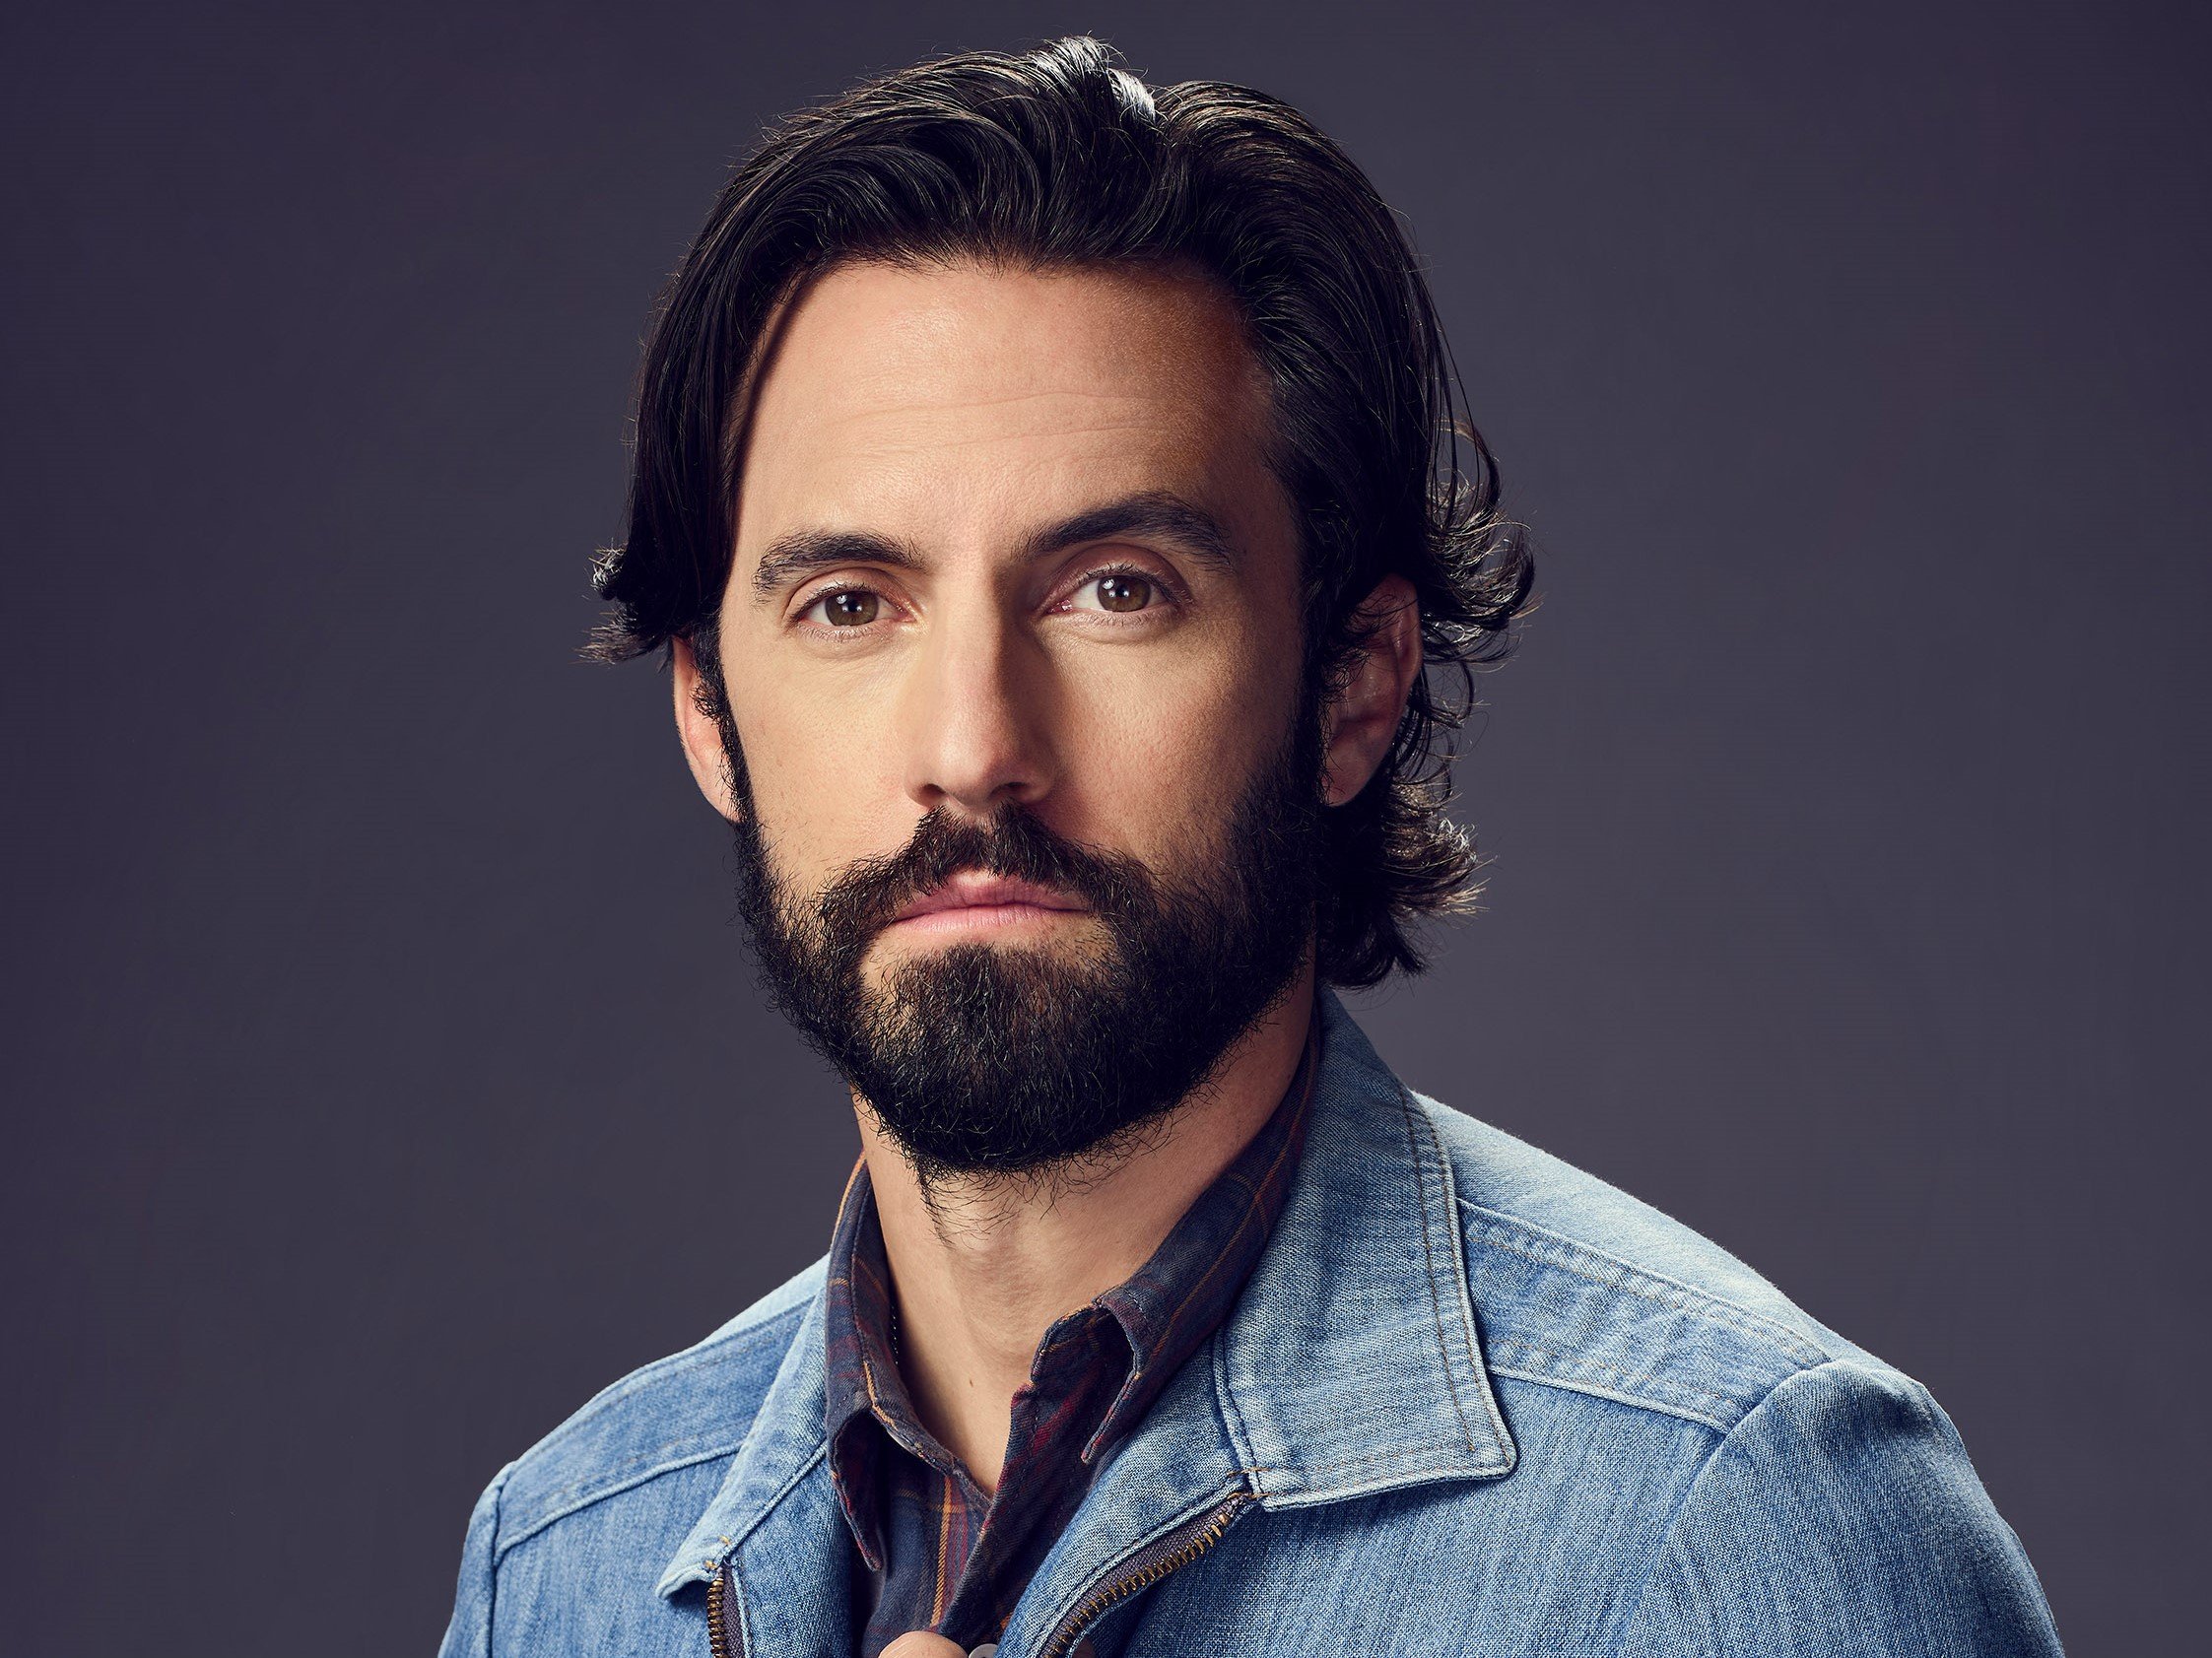 'This Is Us' star Milo Ventimiglia poses as Jack Pearson for promotional pictures for season 6. Ventimiglia wears a denim jacket over a dark plaid shirt.